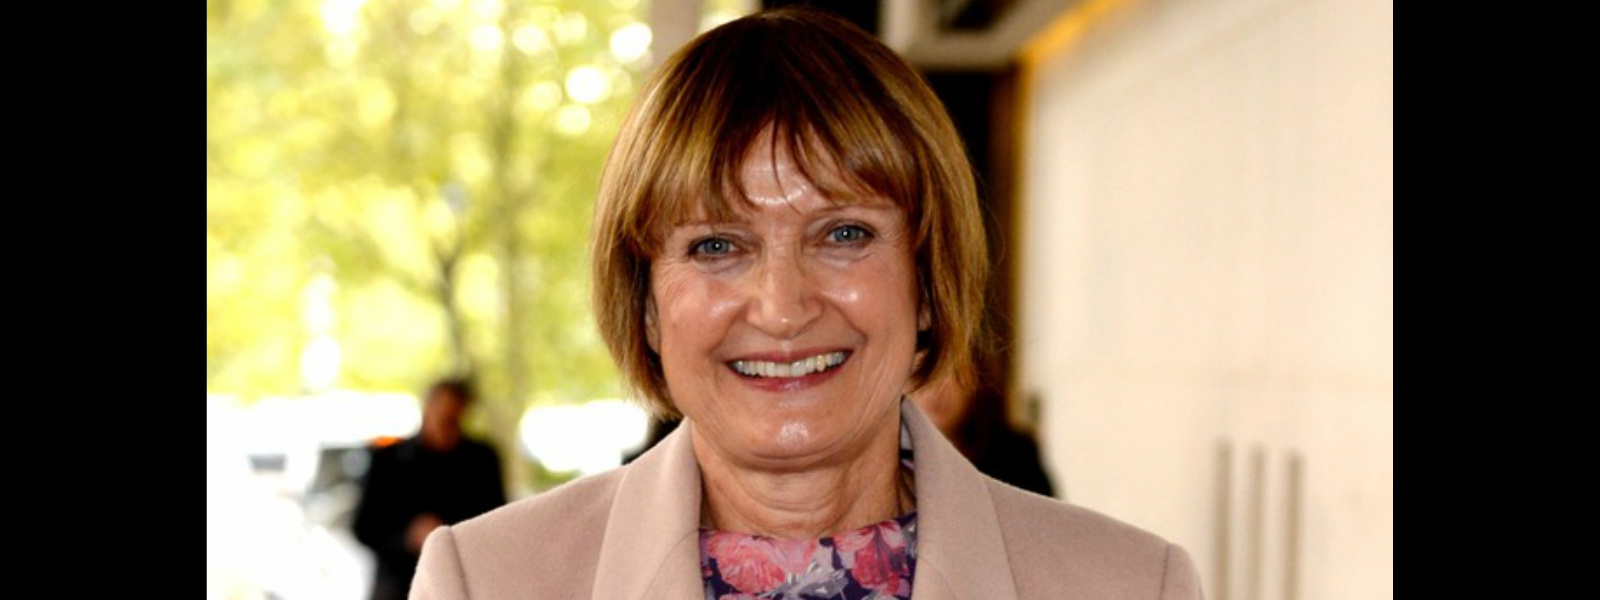 Britain's 'Olympic Games' Min. Jowell dies at 70